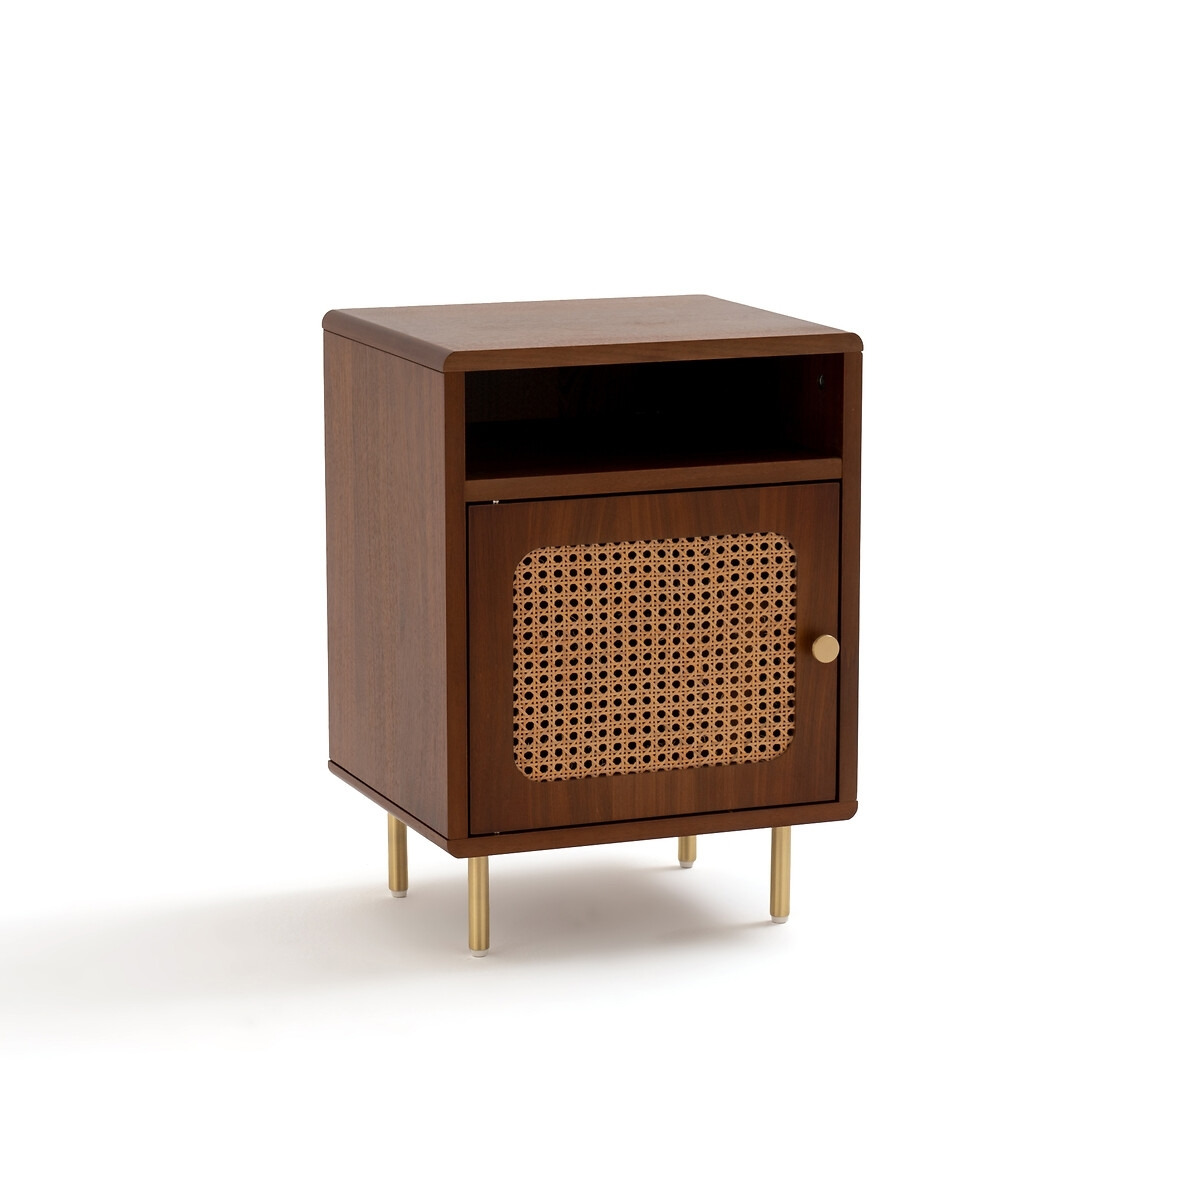 Redpop Cane & Walnut Bedside Table with Cupboard - image 1